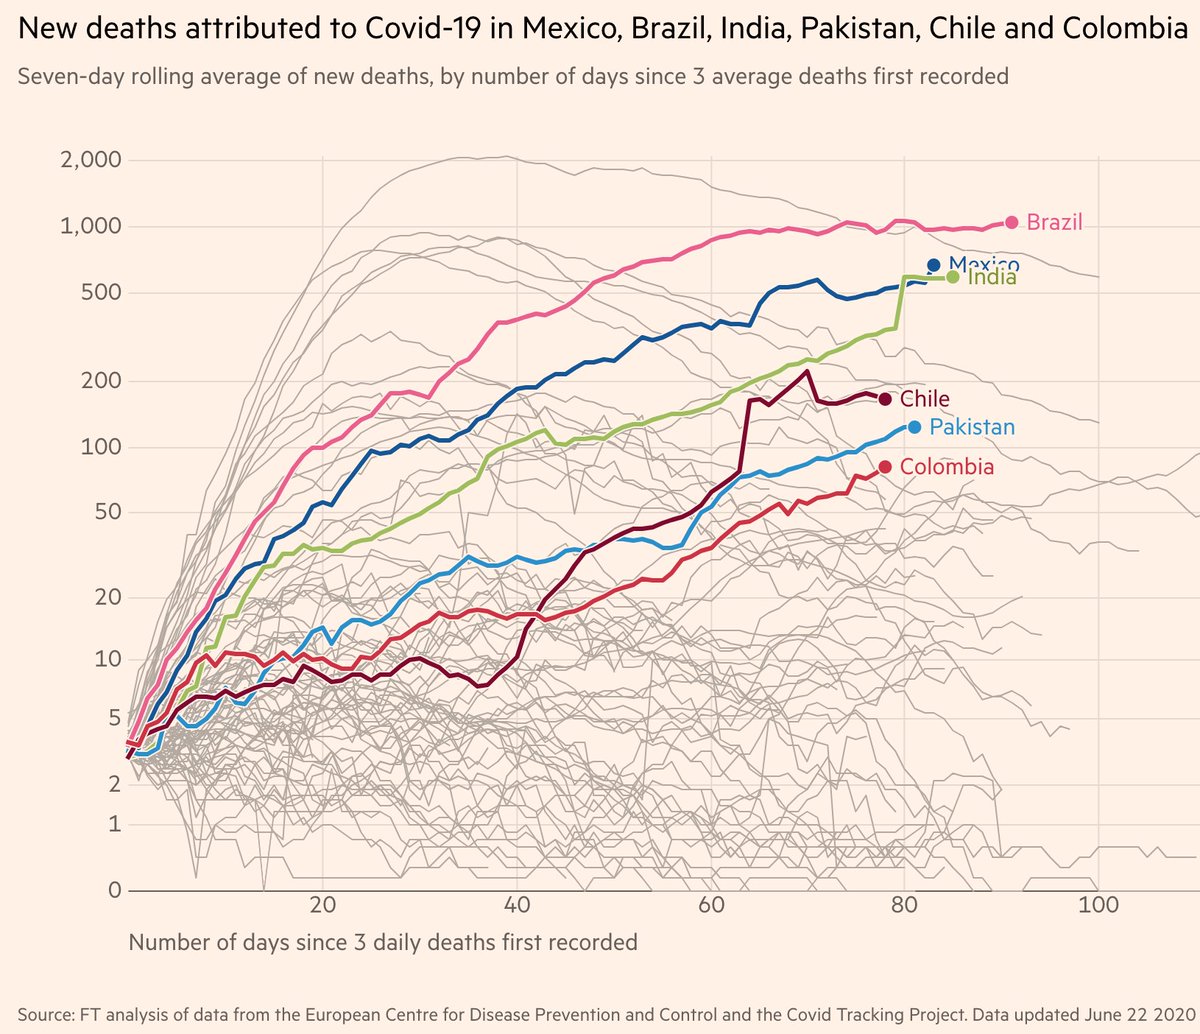  #Mexico is not alone.  #Brazil,  #India,  #Pakistan,  #Chile,  #Colombia are experiencing alarming outbreaks. It is not just that the daily counts of cases and deaths are rather high in these countries. The steep upward slope, which shows RAPID ACCELERATION, is a greater concern.14/